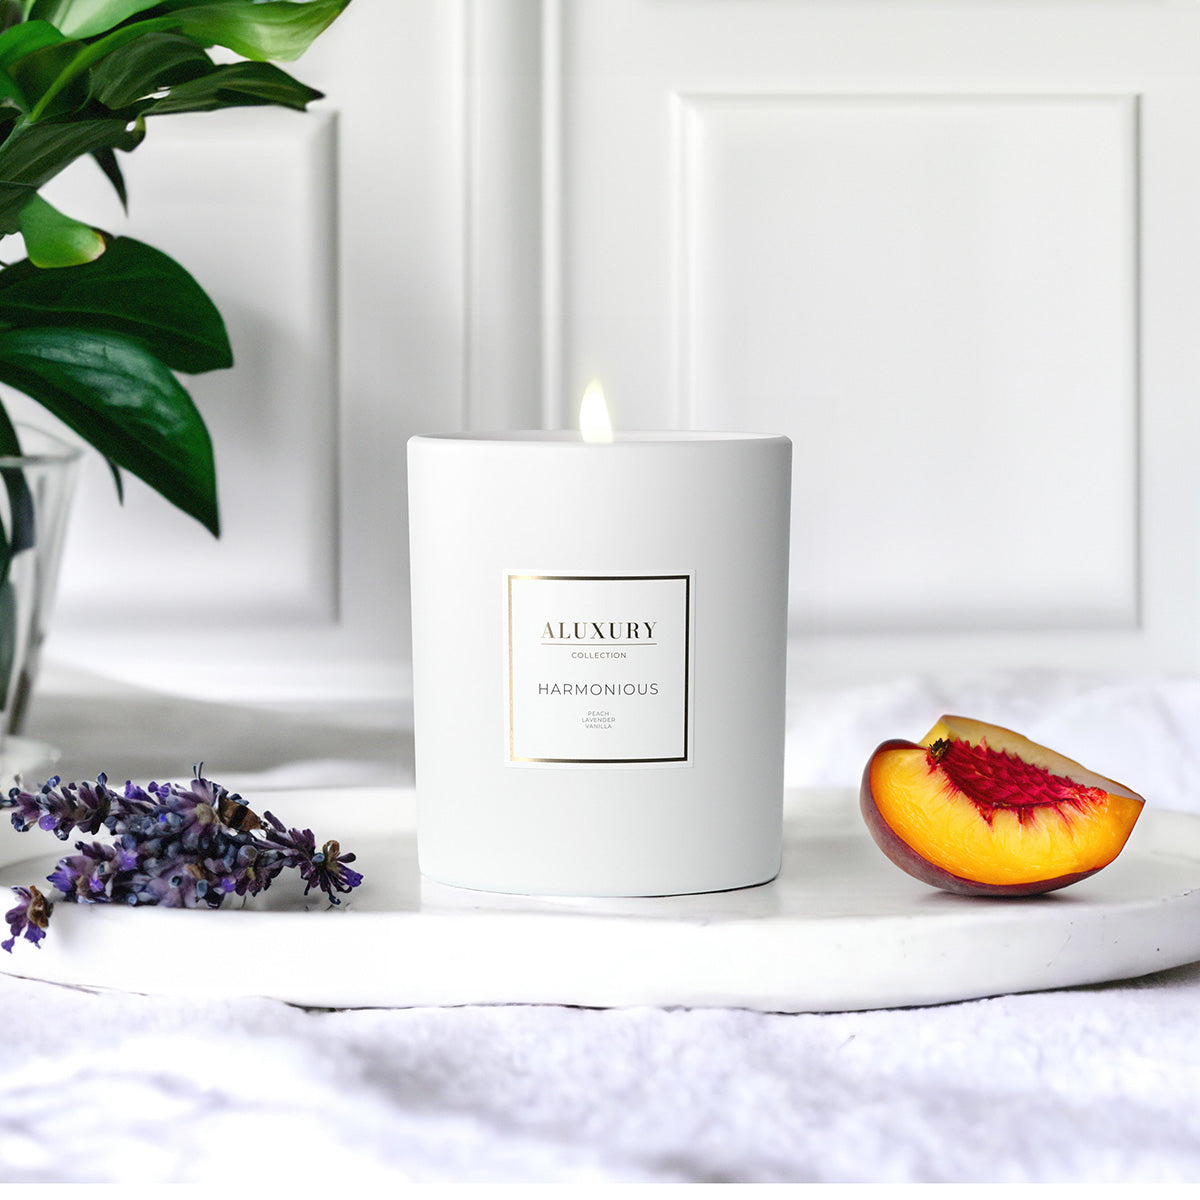 White Harmonious luxury candle made with essential oils by ALUXURY